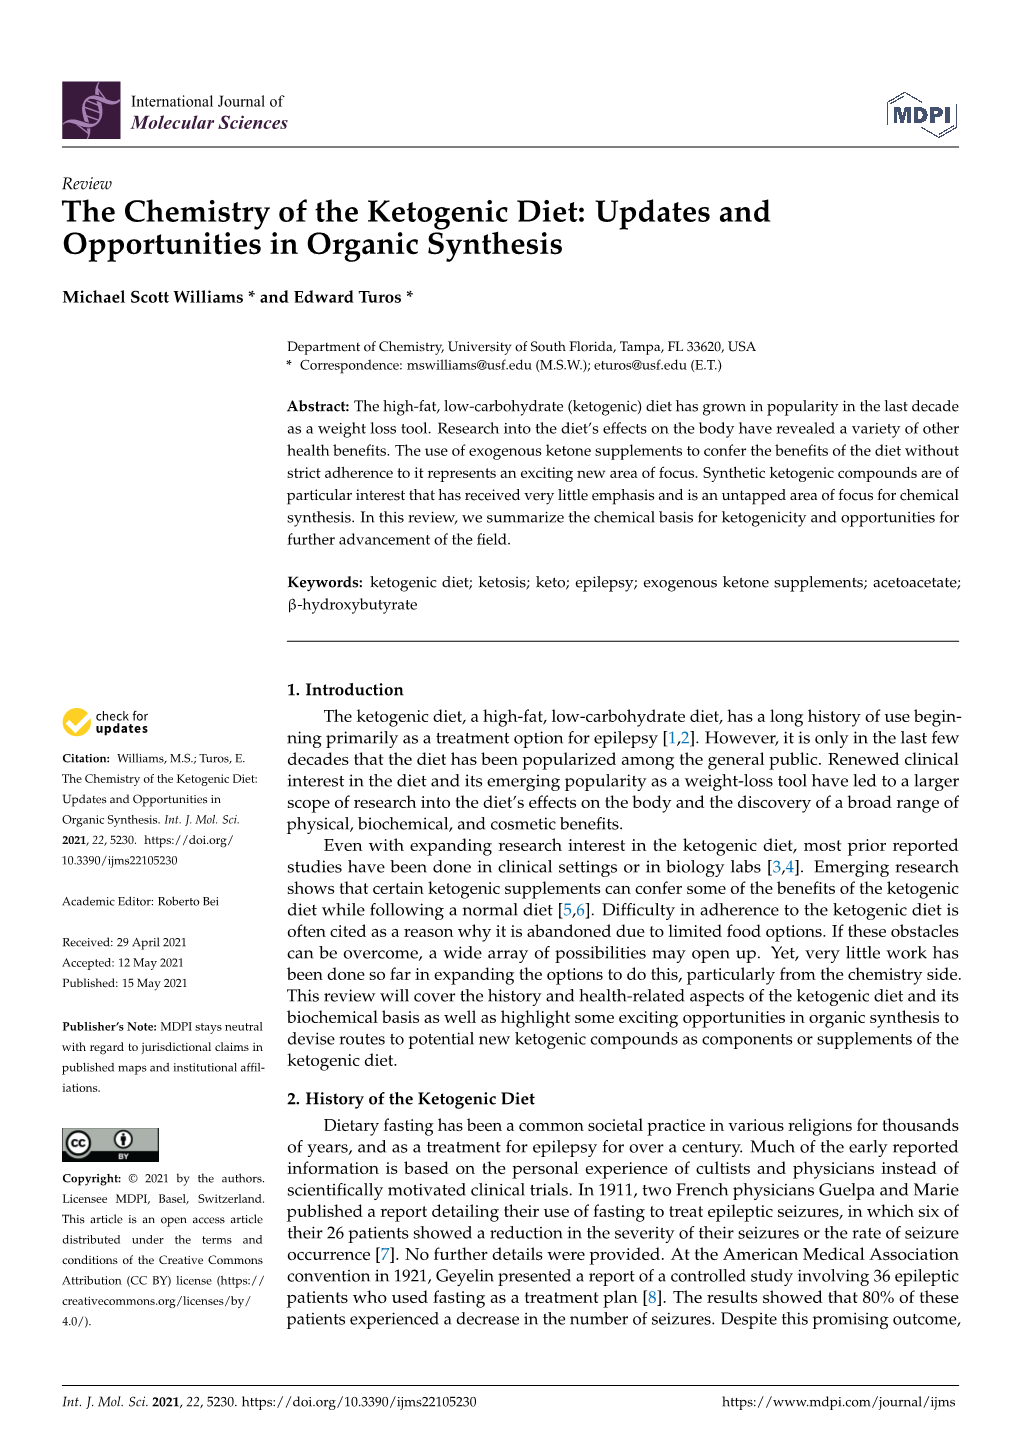 The Chemistry of the Ketogenic Diet: Updates and Opportunities in Organic Synthesis